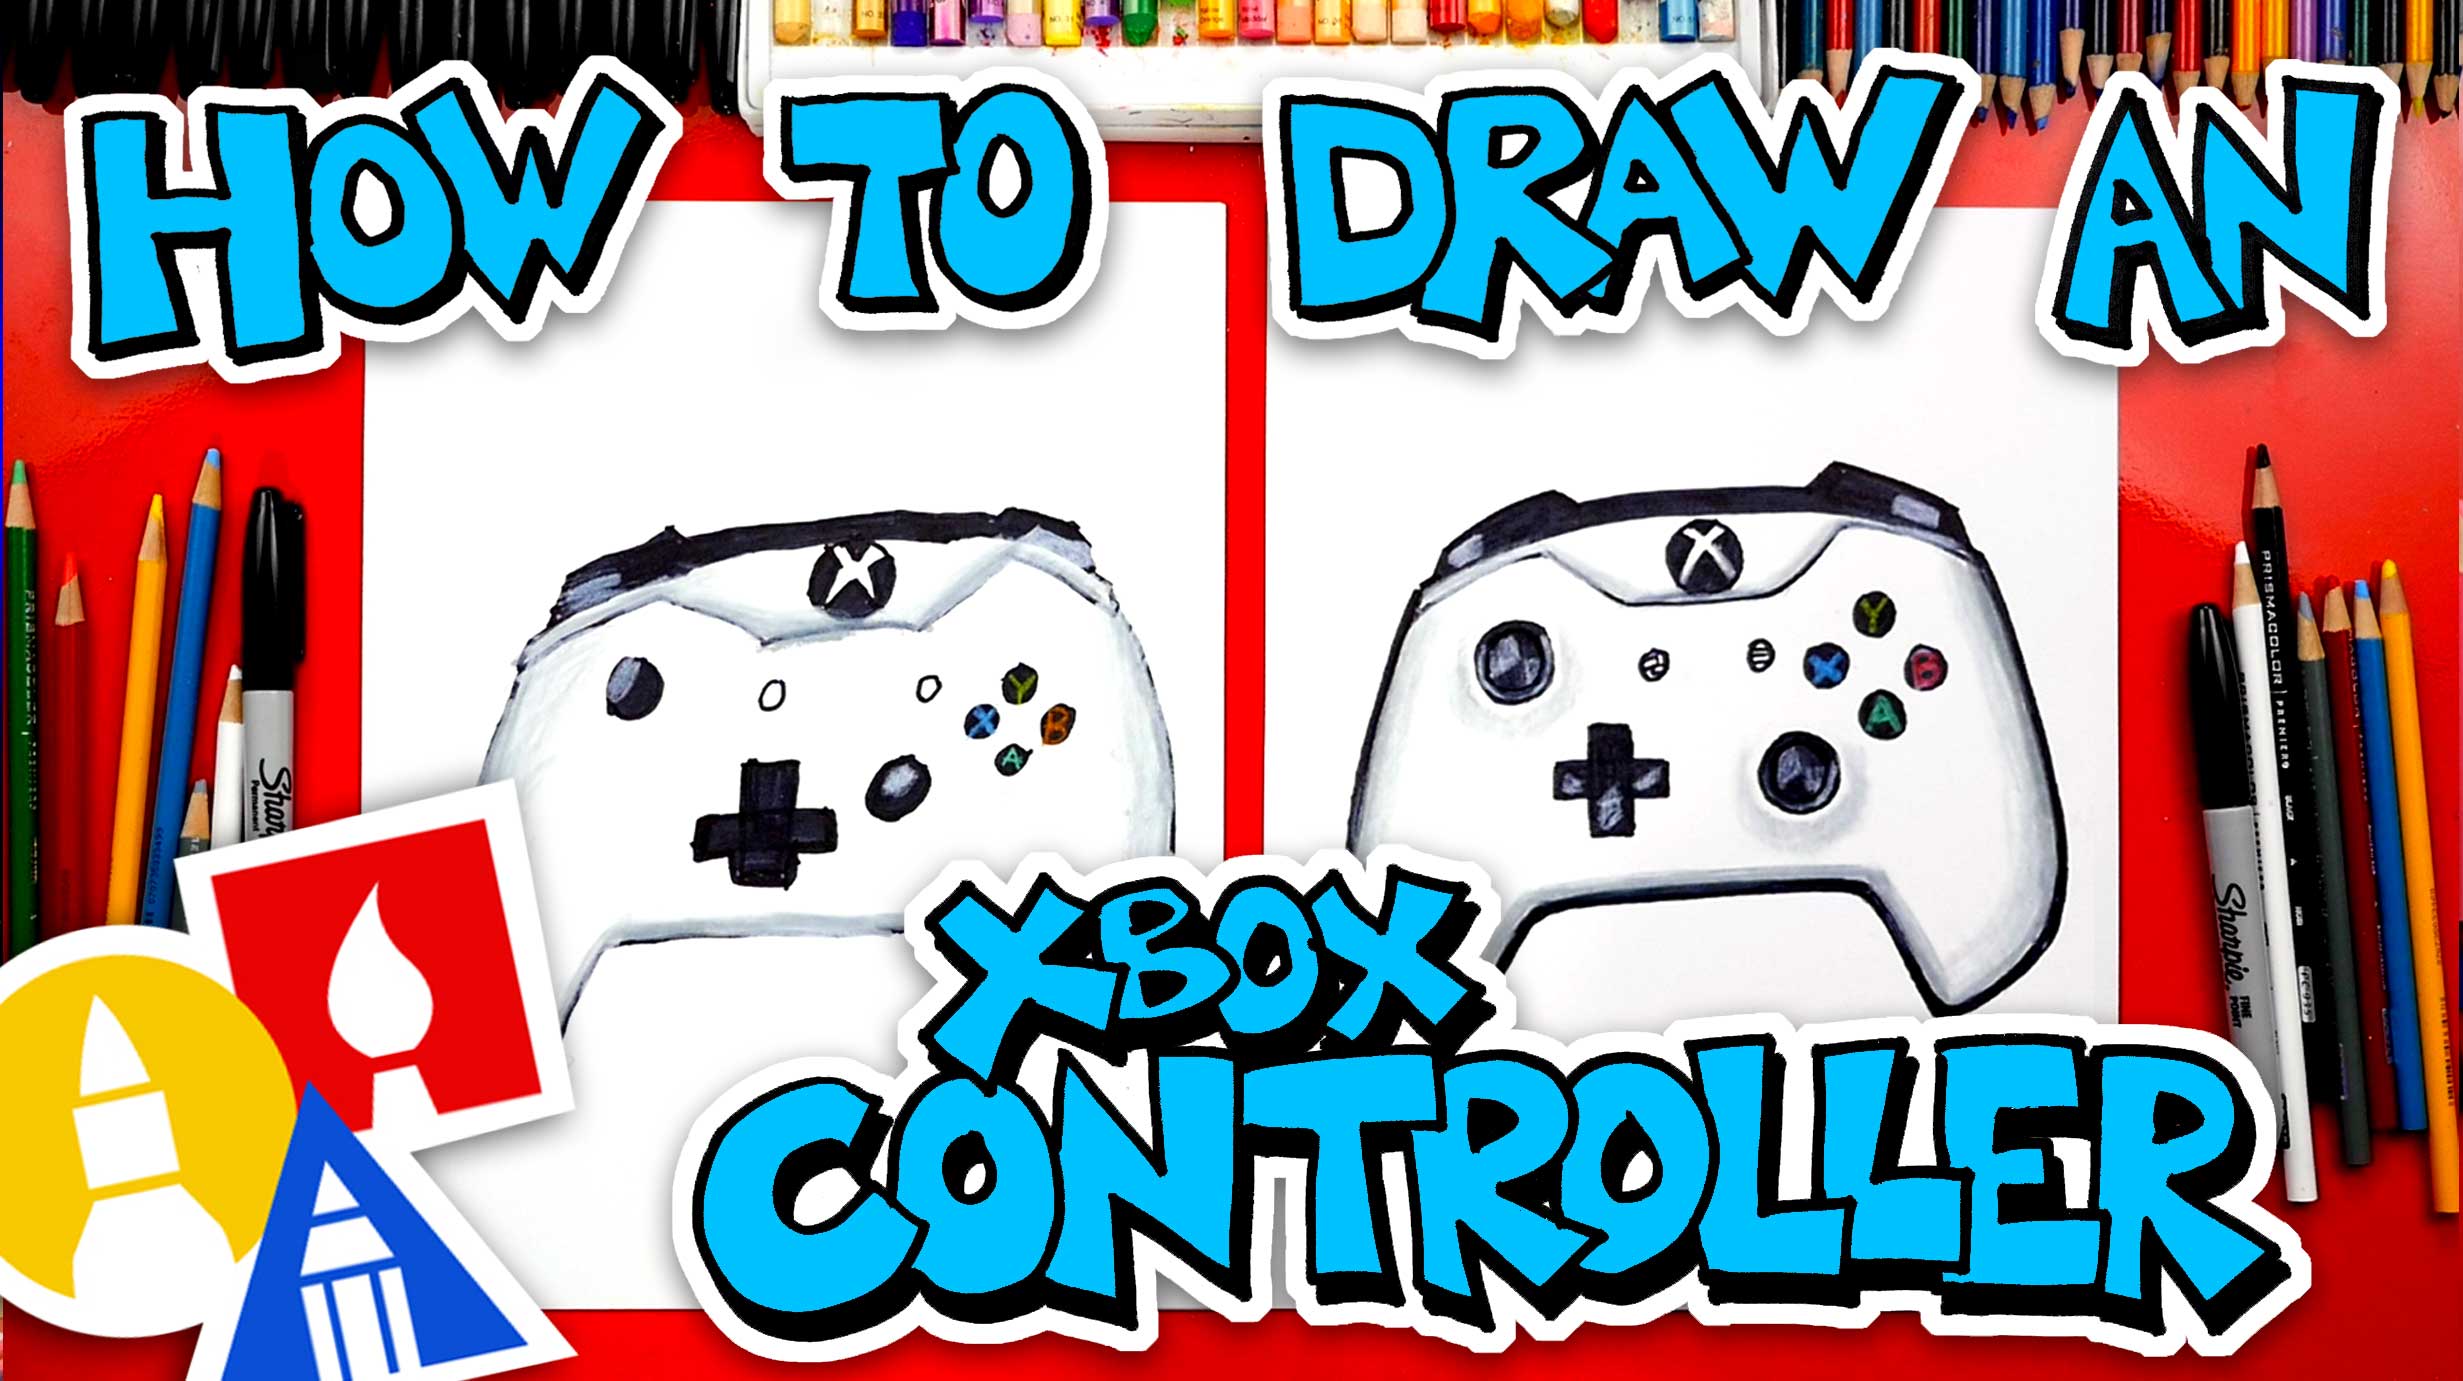 How To Draw An Xbox Controller Art For Kids Hub Similar with game controller clipart. how to draw an xbox controller art